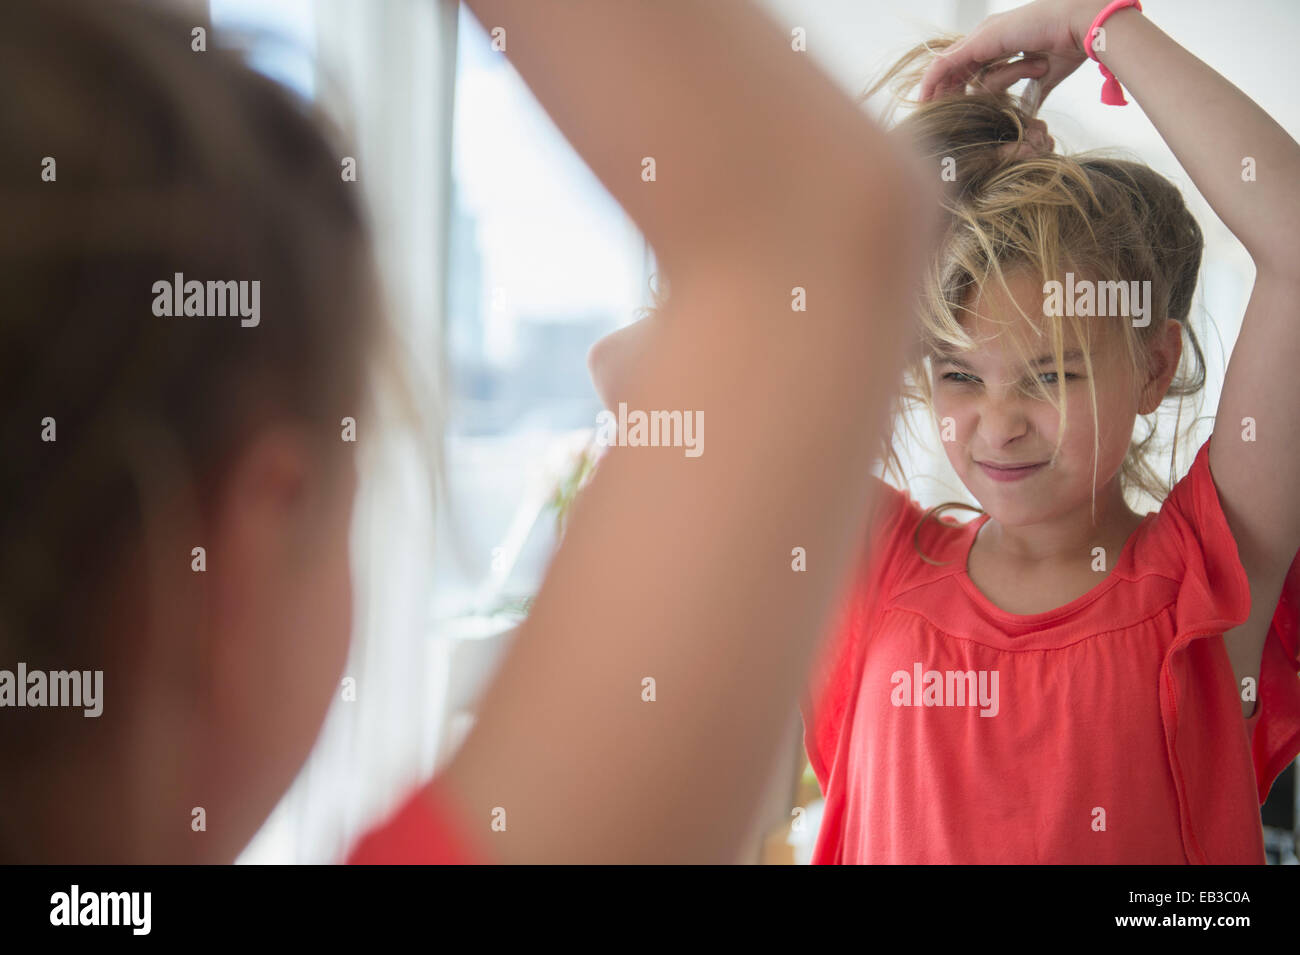 Caucasian girl playing with her hair at mirror Stock Photo